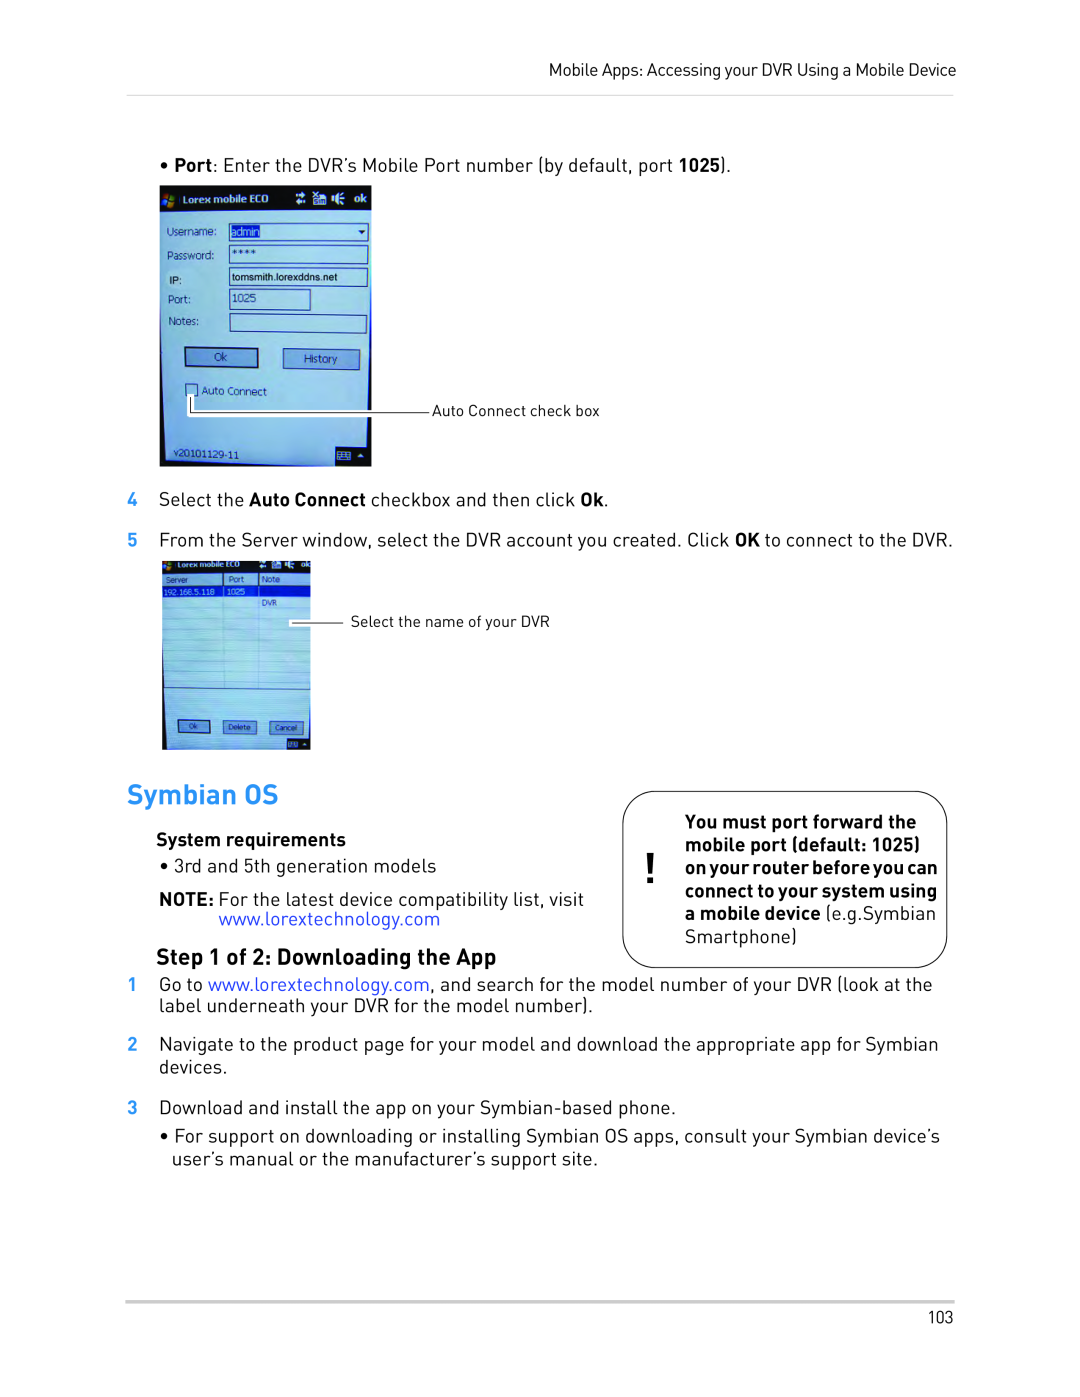 LOREX Technology LH130, LH1361001C8B instruction manual Symbian OS, of 2: Downloading the App, System requirements 